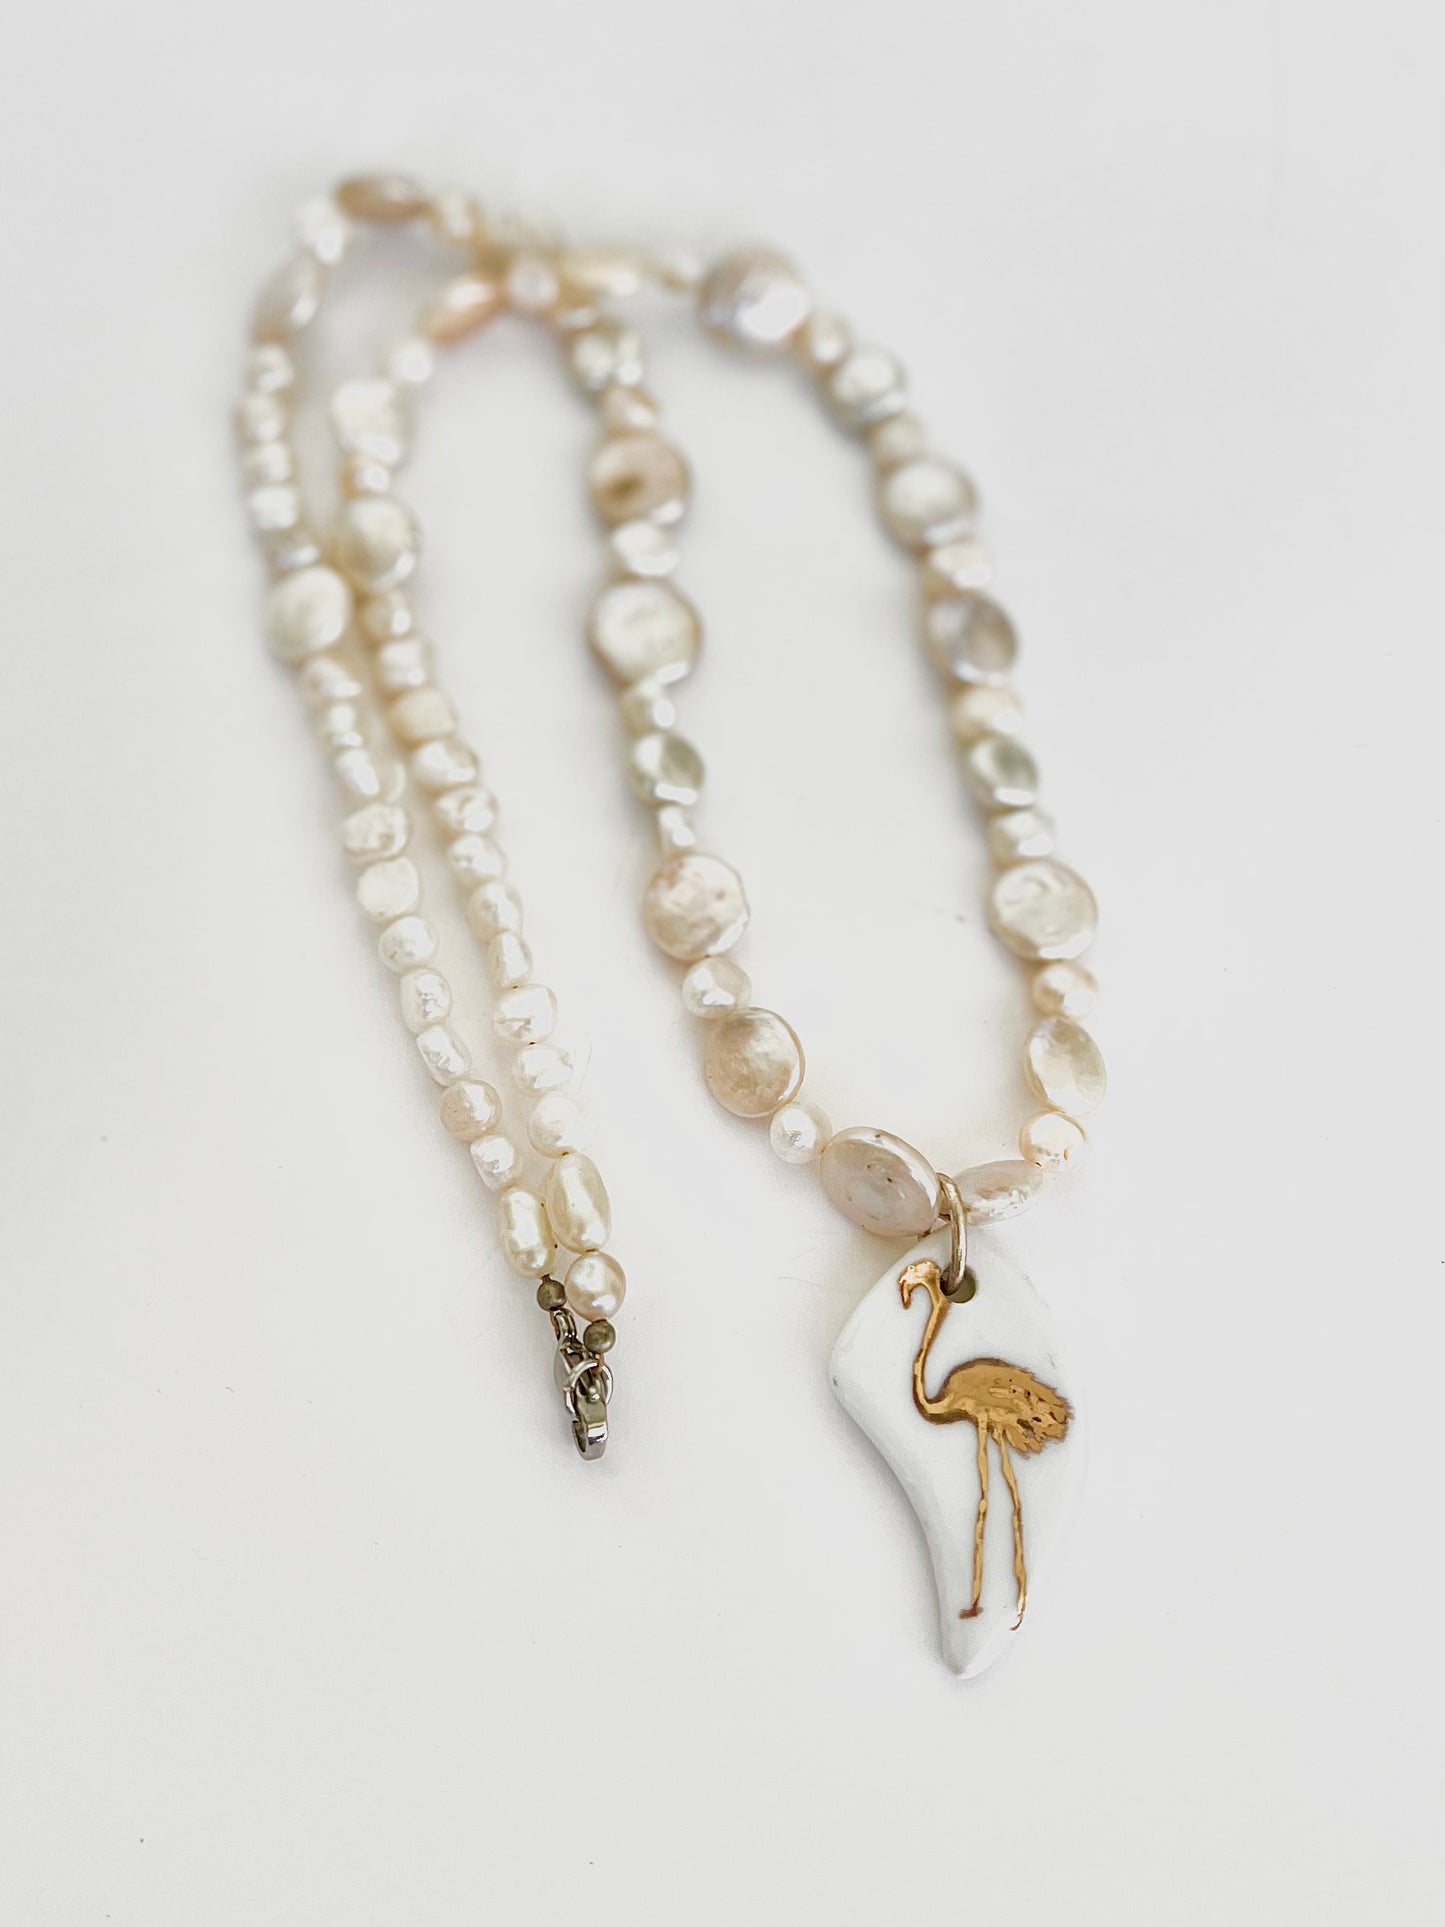 Necklace, Pearl necklace, gift for that flamingo lover, Pearl Flamingo Necklace